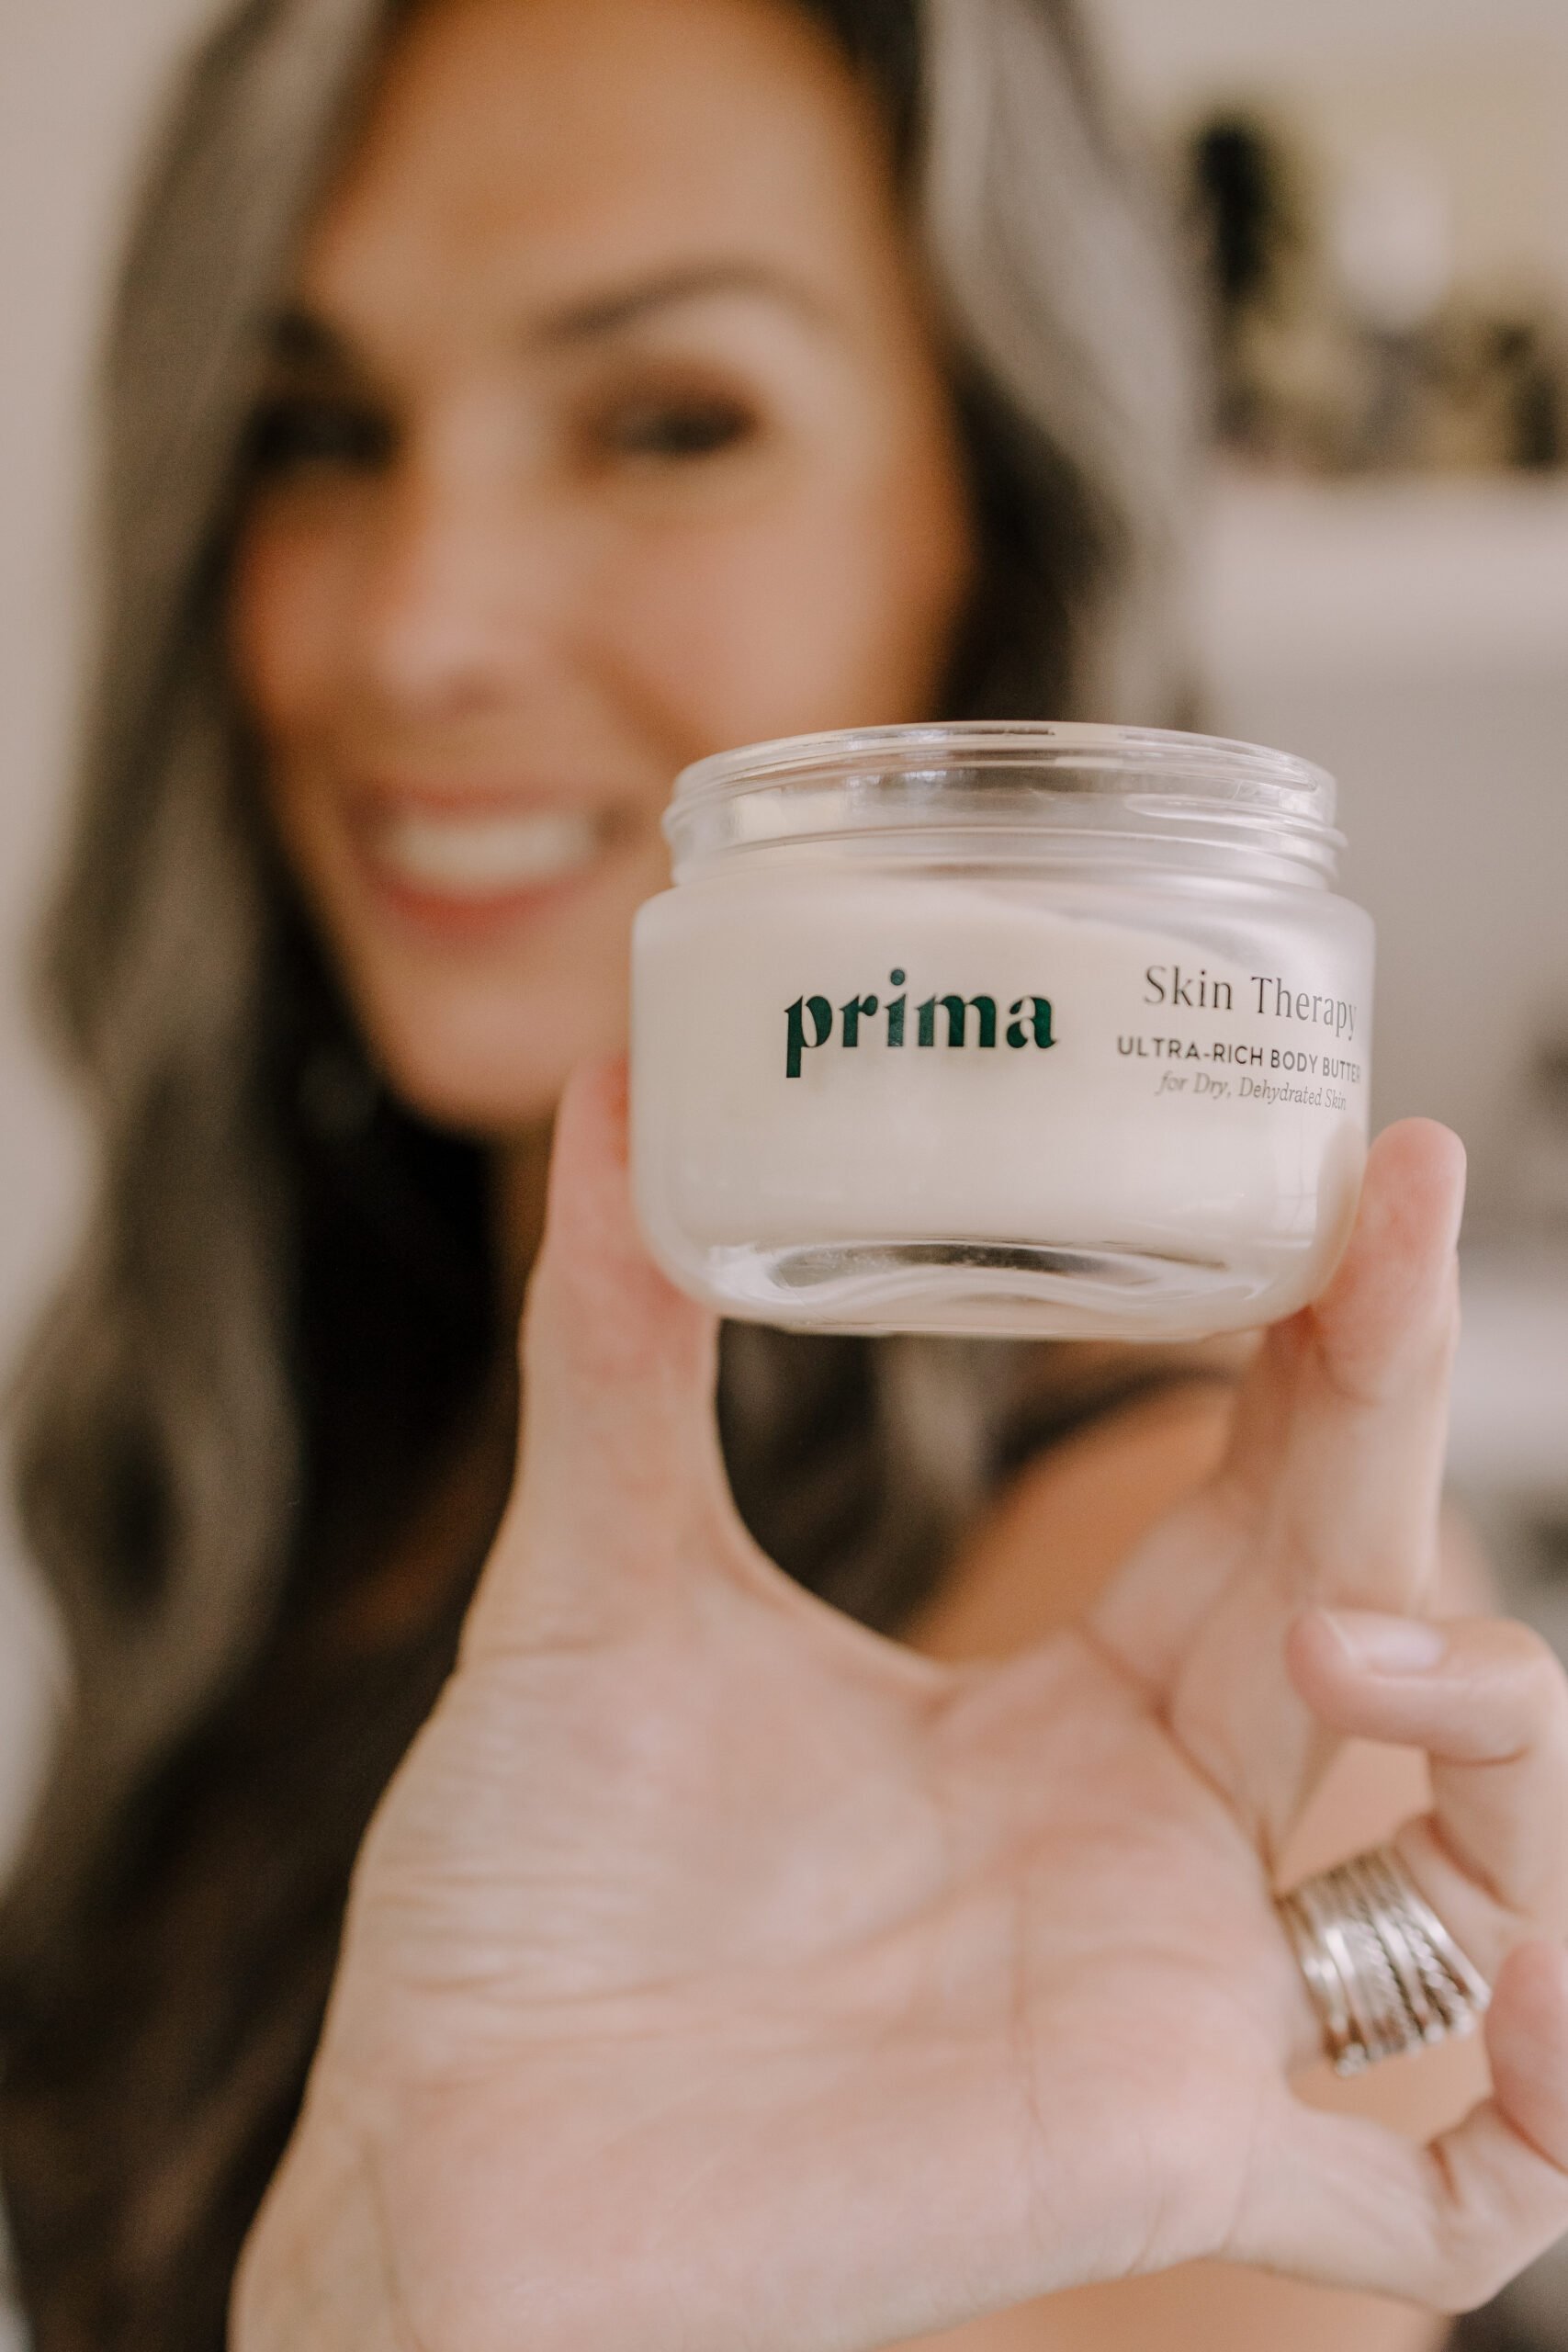 a woman holds up a tub of prima skin therapy